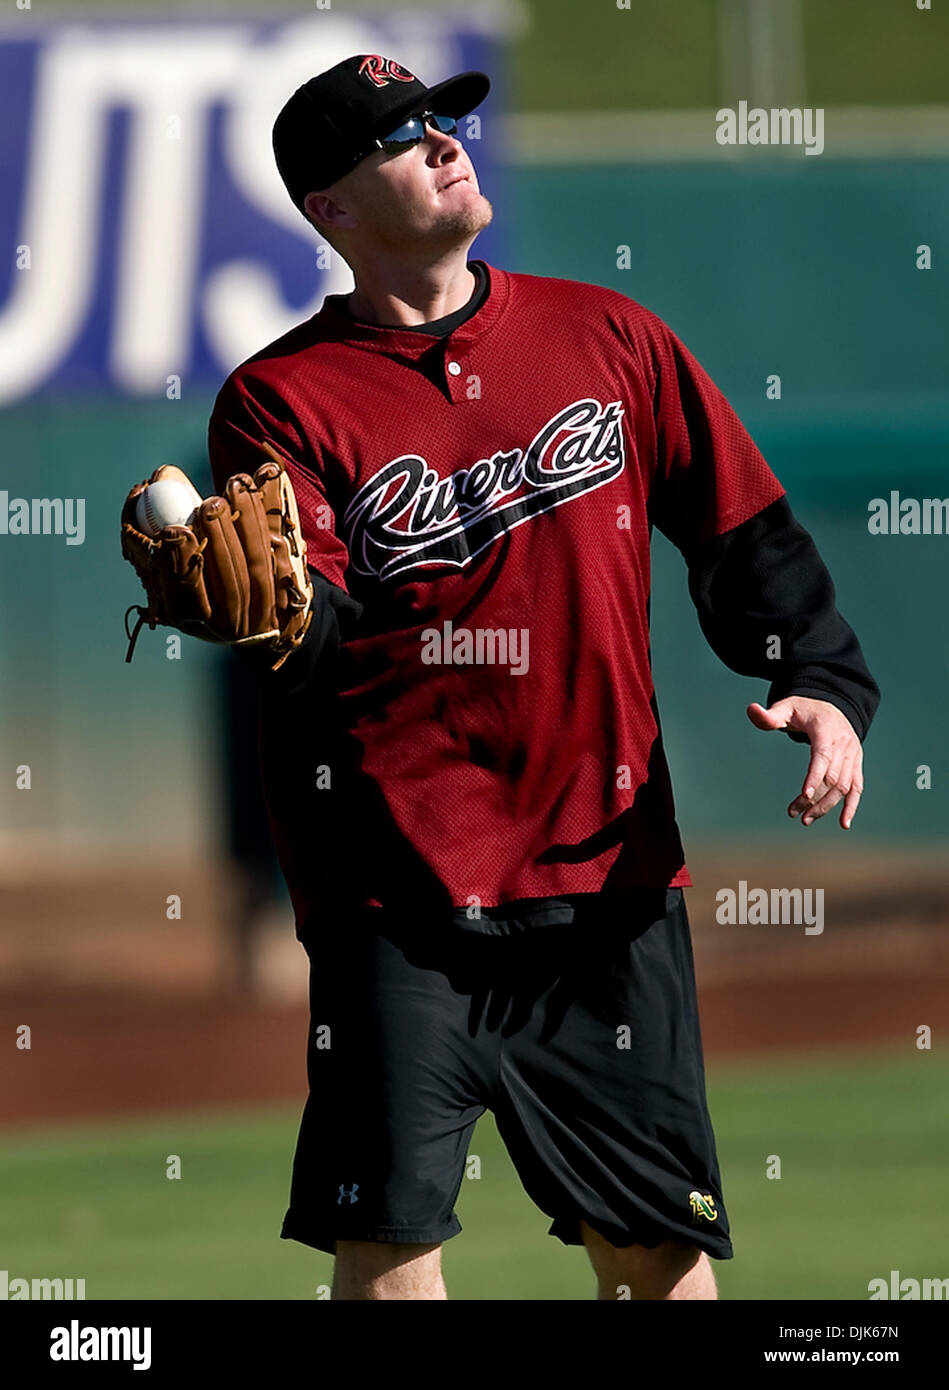 Aug. 30, 2010 - West Sacramento, CA, USA - River Cats starting pitcher Bobby Cramer shags fly ball during batting practice. He has overcome Tommy John surgery and stints away from baseball as a teacher and Shell Oil employee to become a key figure in Sacramento's playoff push.August 30, 2010 in West Sacramento, Calif. (Credit Image: © Sacramento Bee/ZUMApress.com) Stock Photo